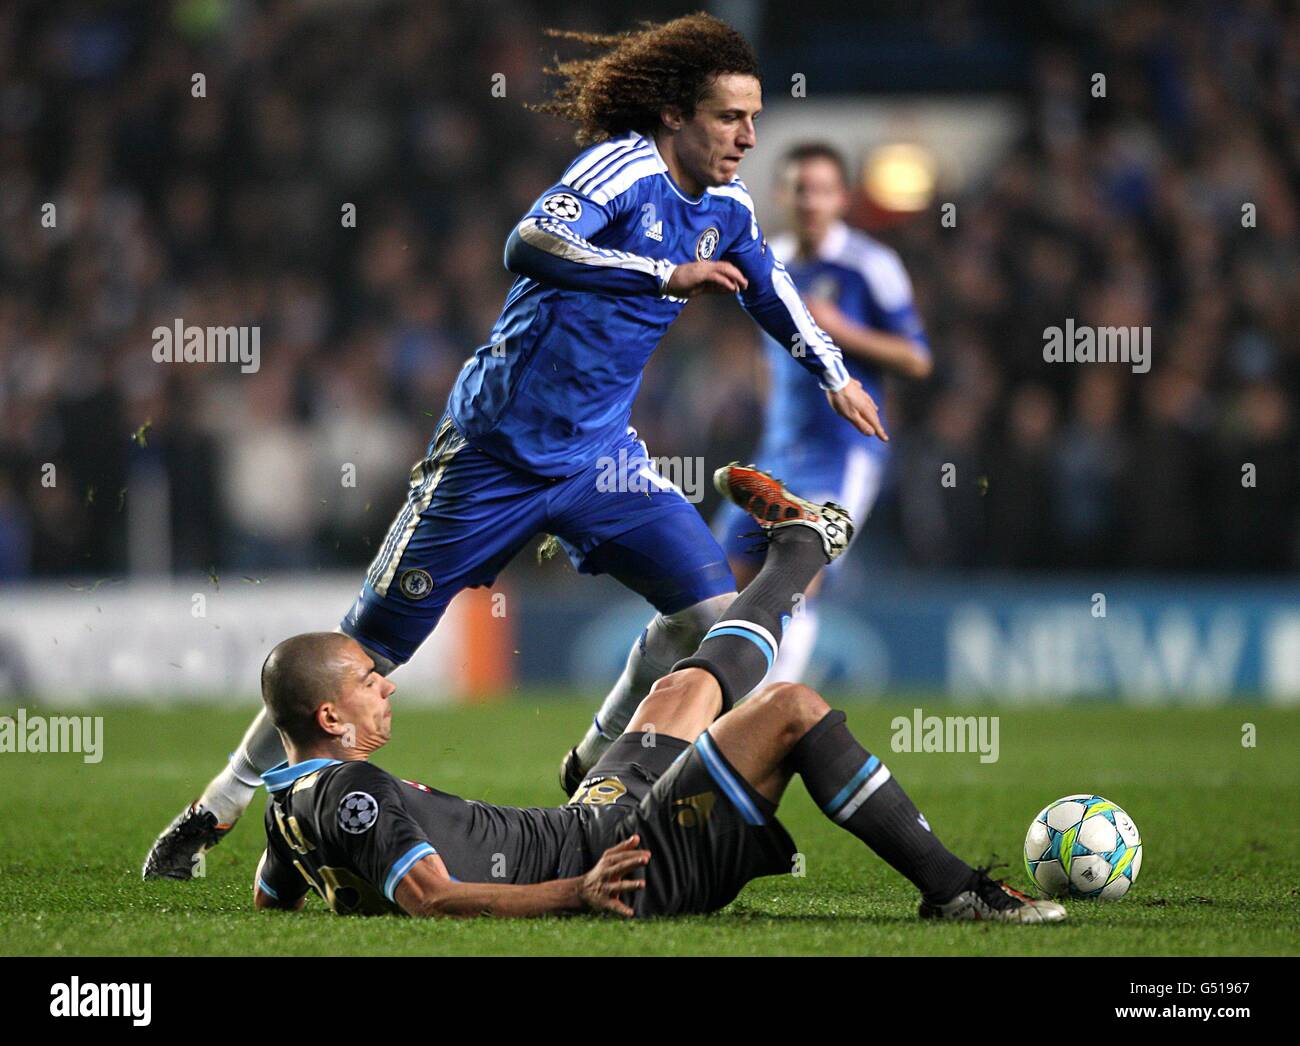 Napoli's Gokhan Inler takes a tumble after a challenge from Chelsea's David Luiz Stock Photo